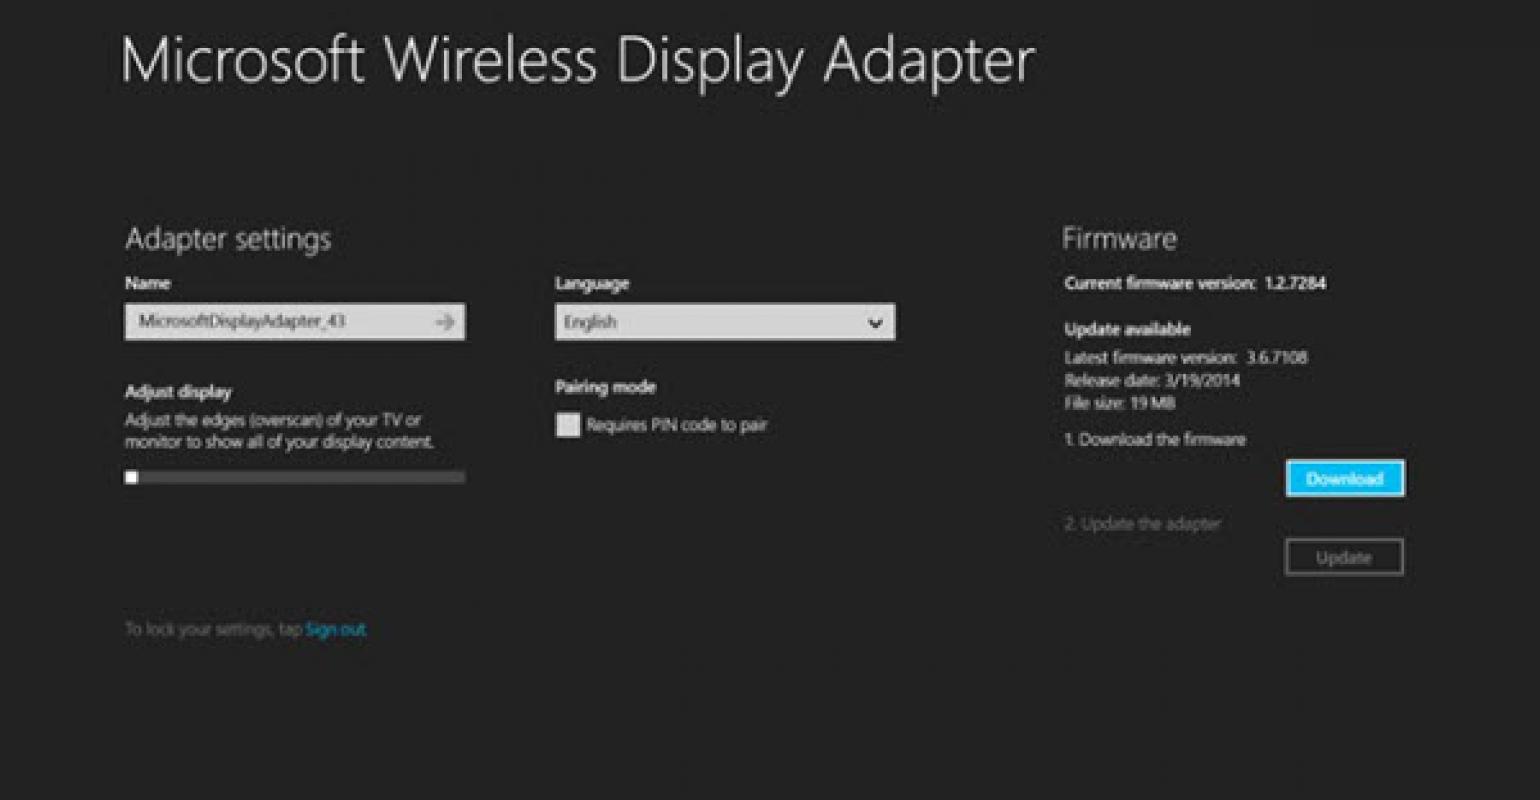 Customization and Configuration for the Microsoft Wireless Display